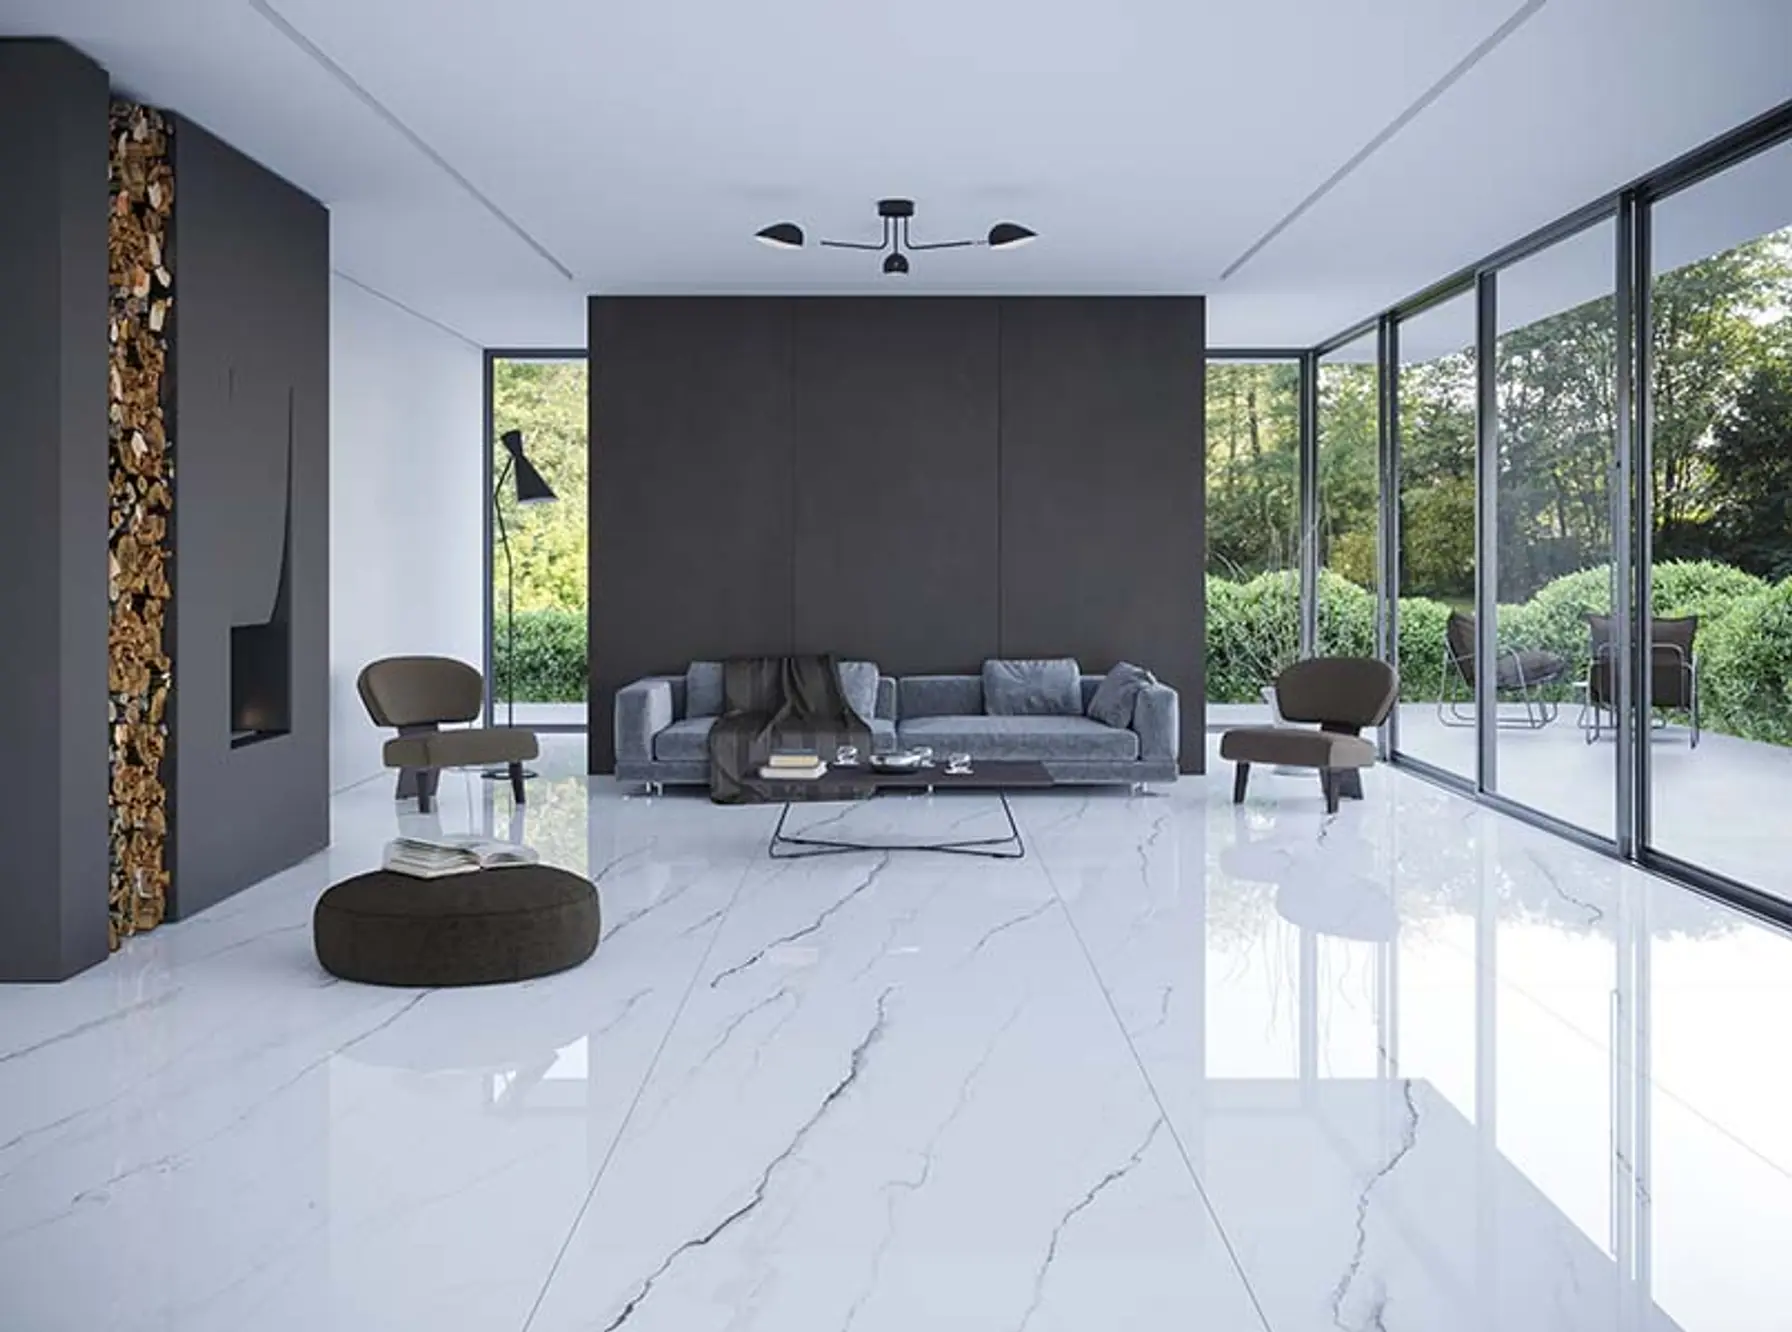 Aximer Ceramic Products in 3 Prestigious Luxury Villas Projects